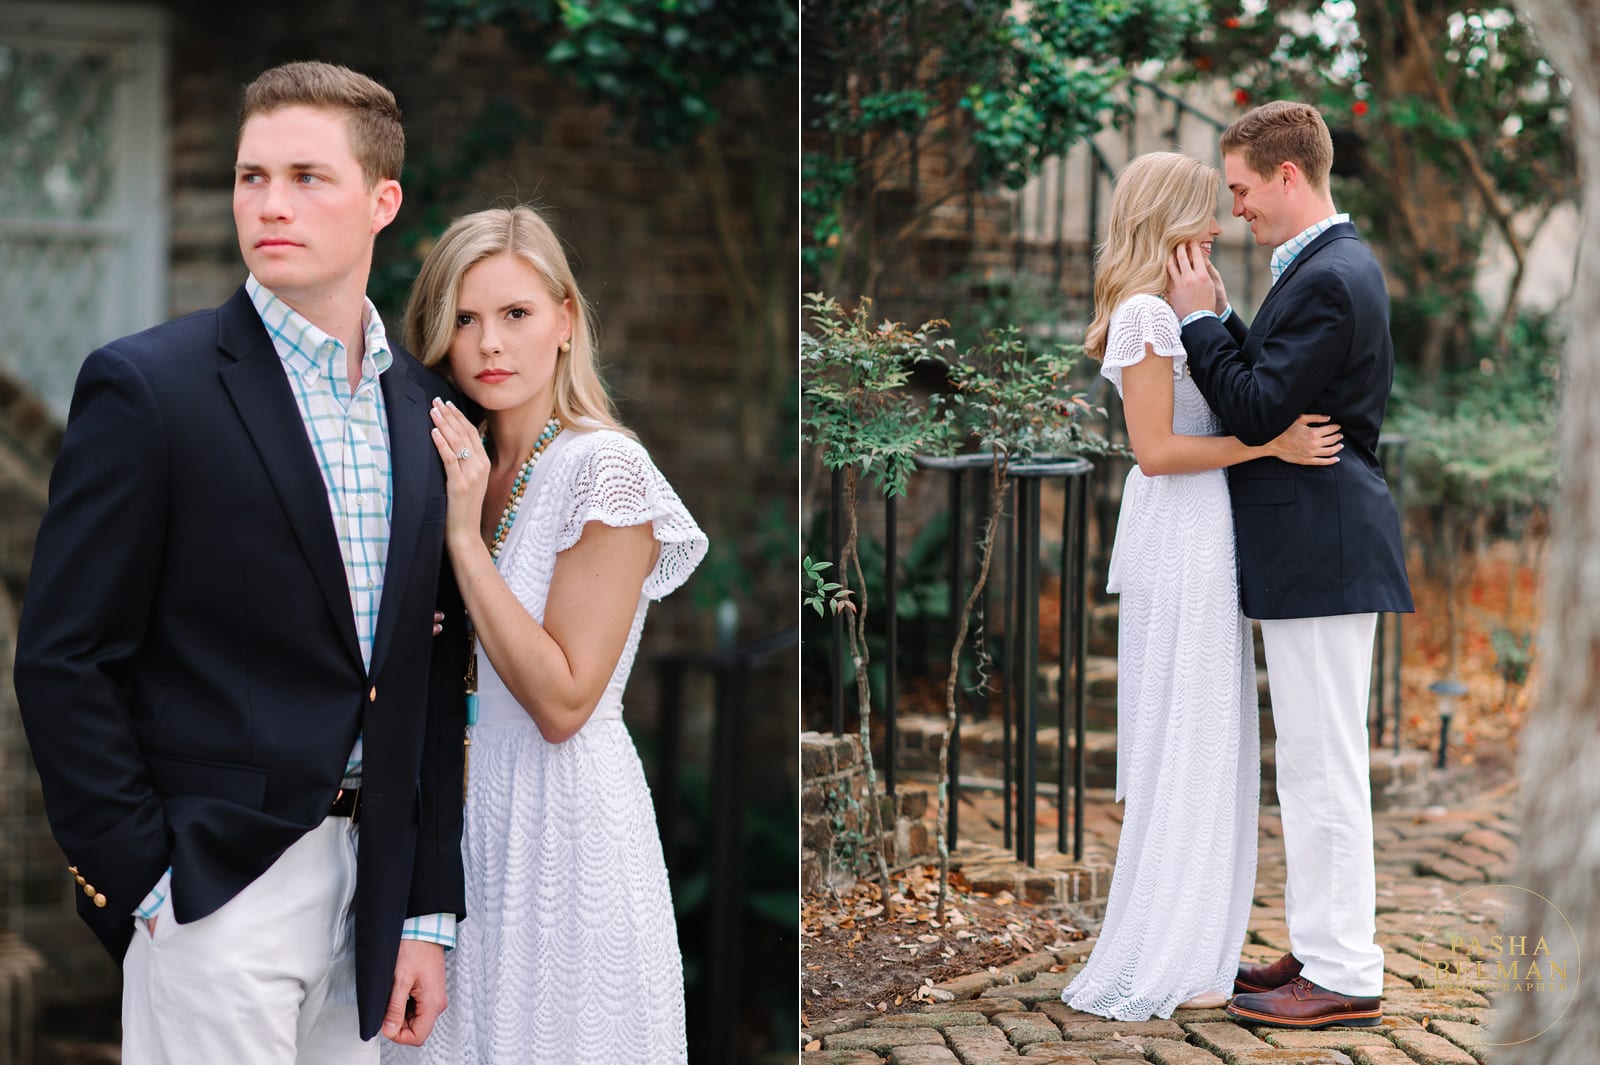 Southern Mansfield Plantation Engagement Session by Pasha Belman | Engagement Pictures around Charleston